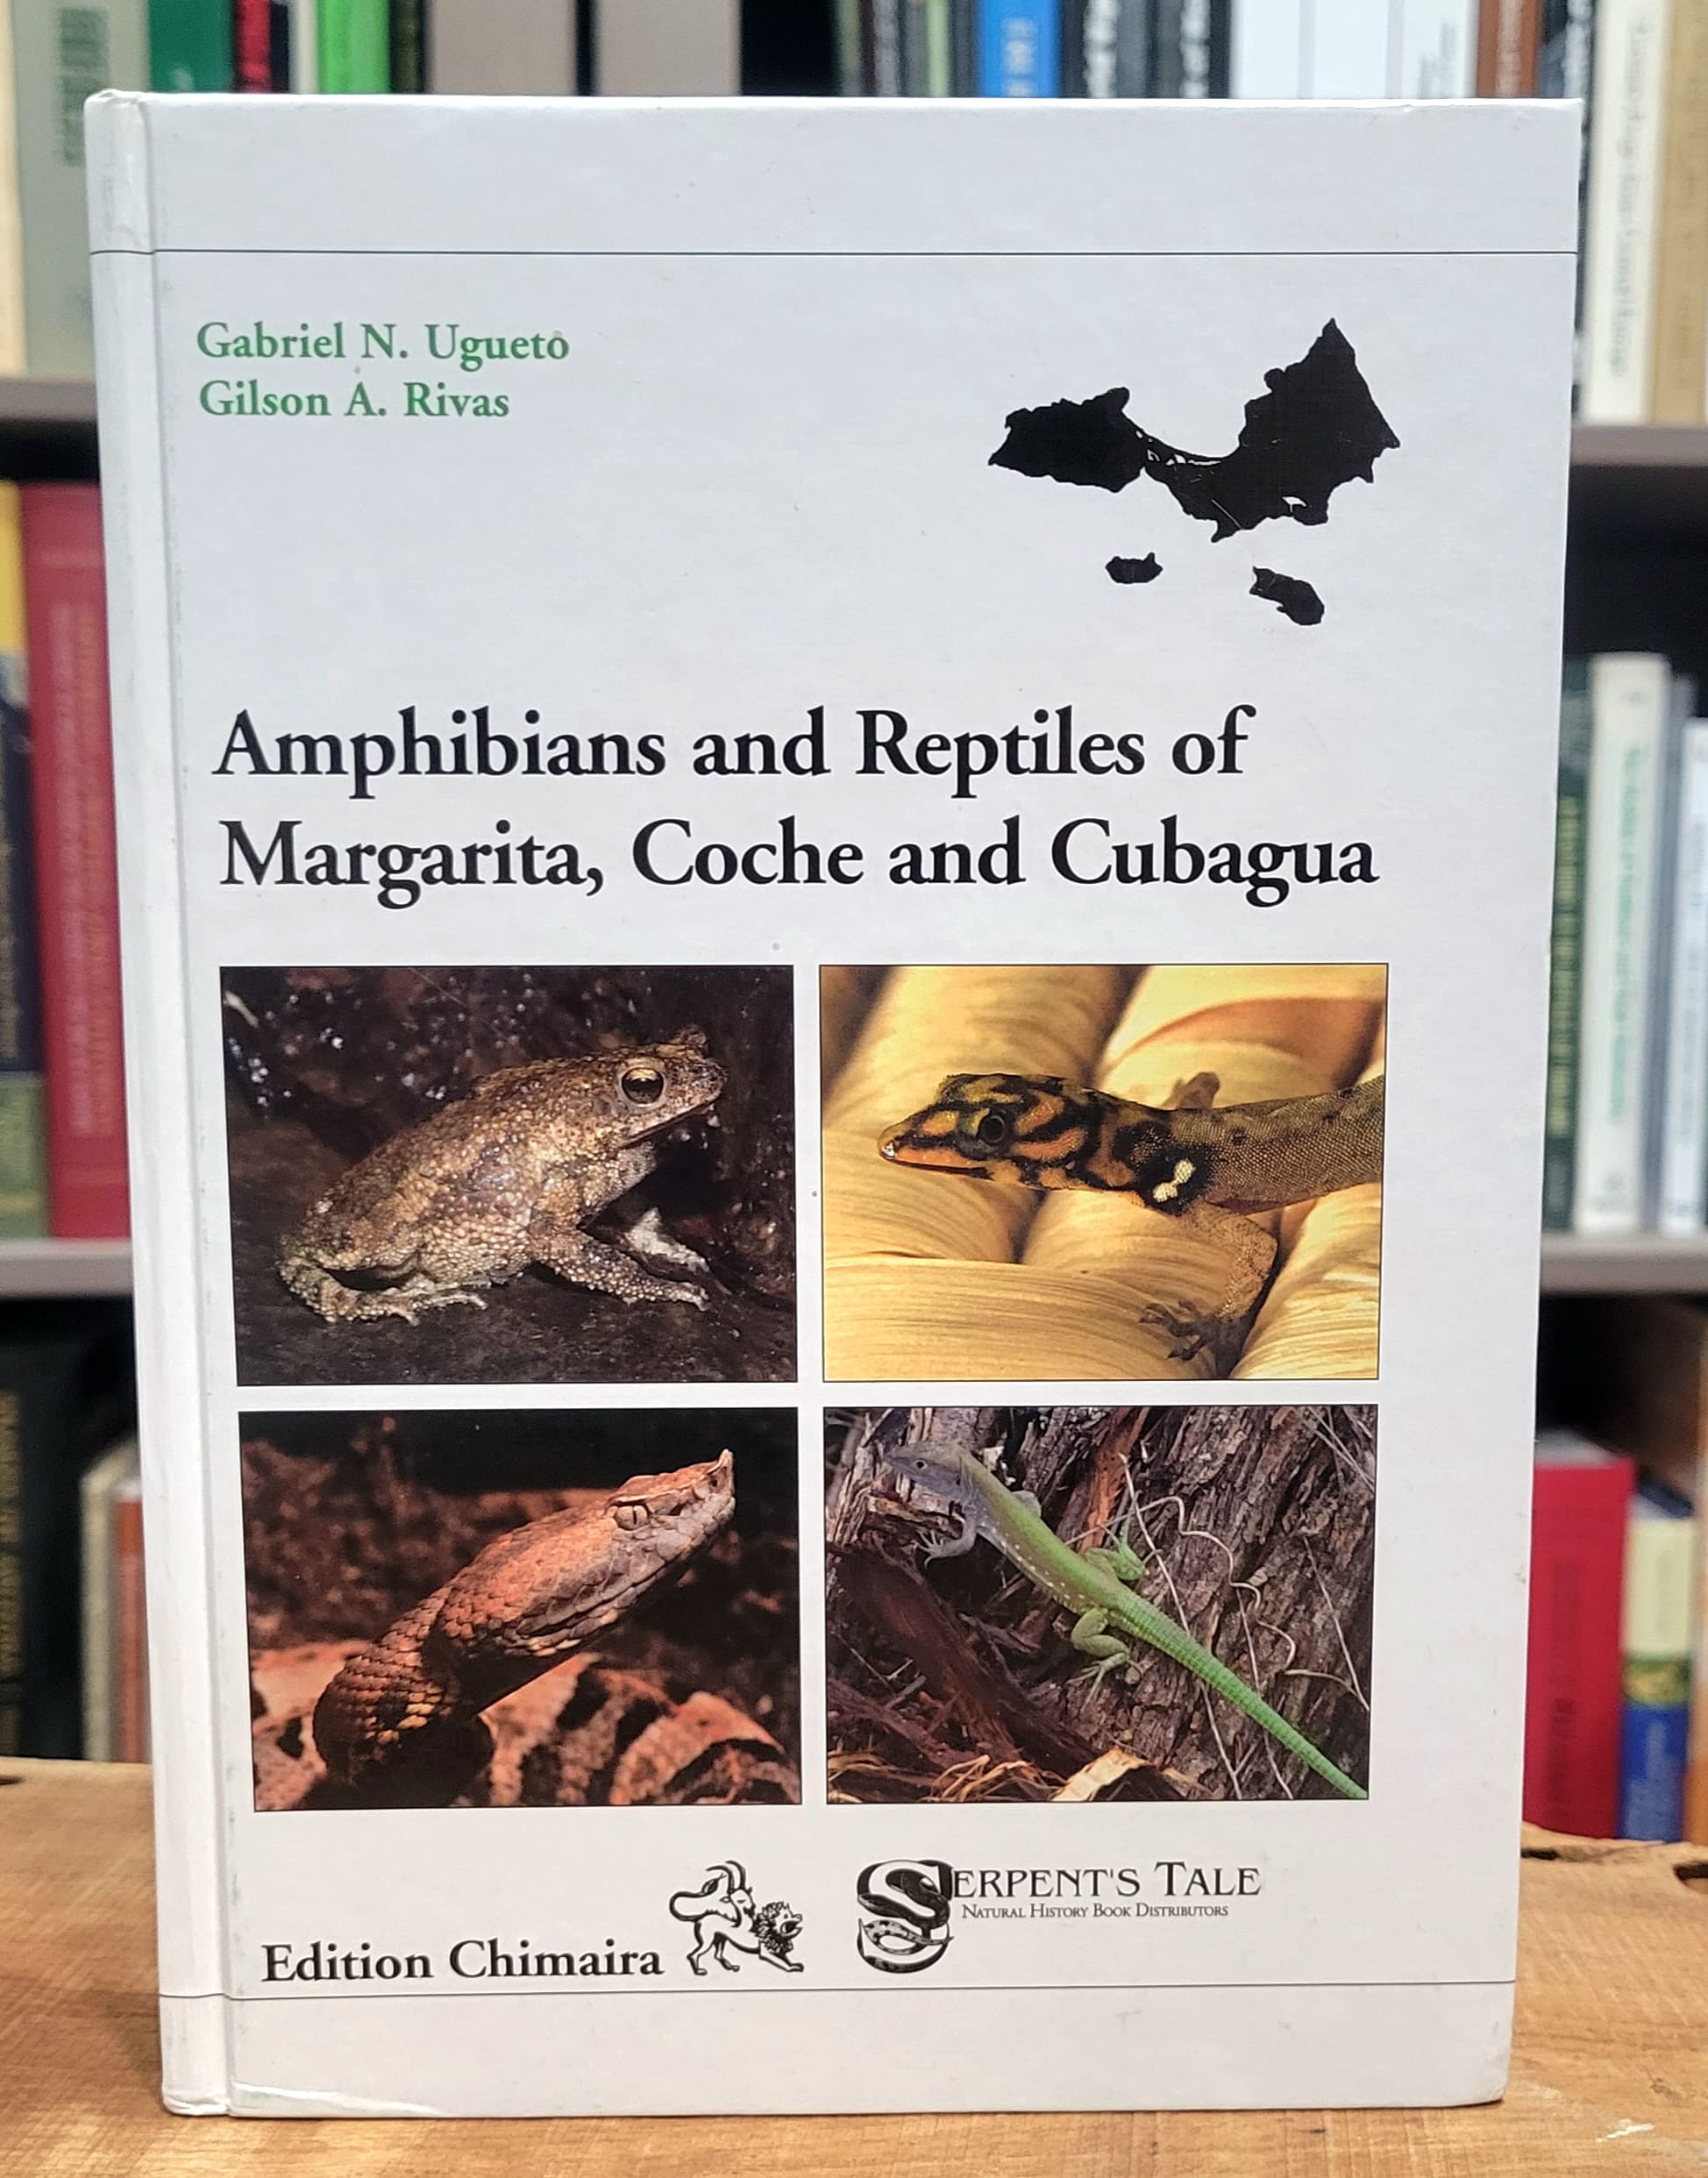 Amphibians and Reptiles of Margarita, Coche, and Cubagua